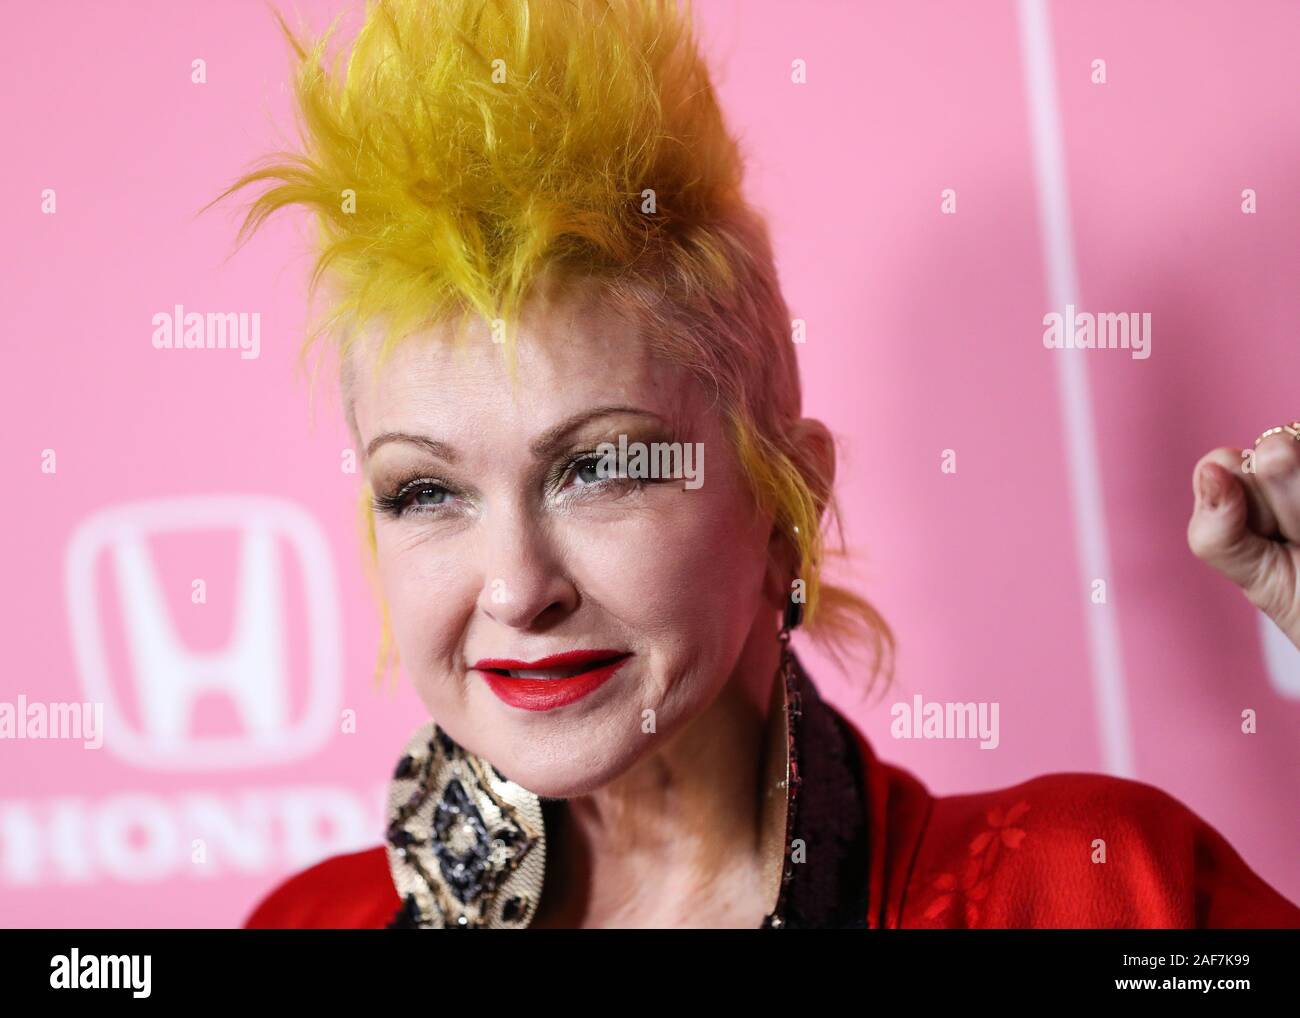 HOLLYWOOD, LOS ANGELES, CALIFORNIA, USA - DECEMBER 12: Singer Cyndi Lauper arrives at the 2019 Billboard Women In Music Presented By YouTube Music held at the Hollywood Palladium on December 12, 2019 in Hollywood, Los Angeles, California, United States. (Photo by Xavier Collin/Image Press Agency) Stock Photo